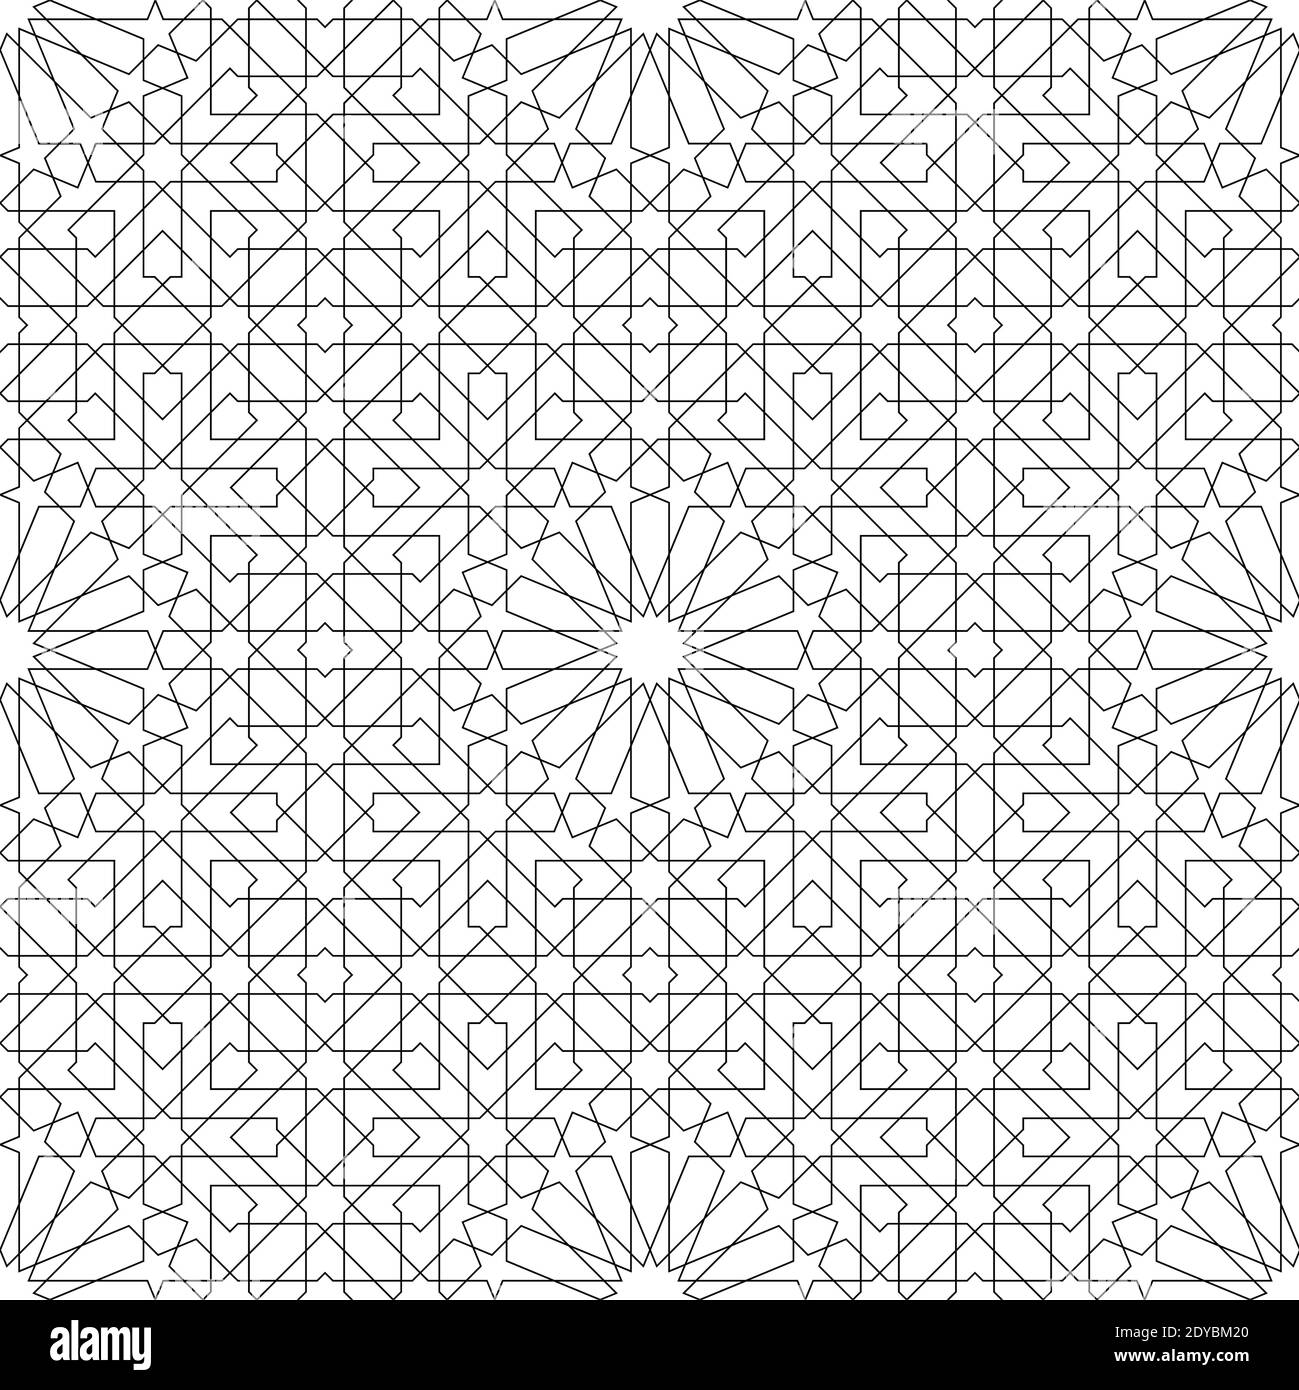 Background seamless pattern based on traditional islamic artblack colorgreat design for fabrictextilecoverwrapping paperbackgroundfine lines stock vector image art